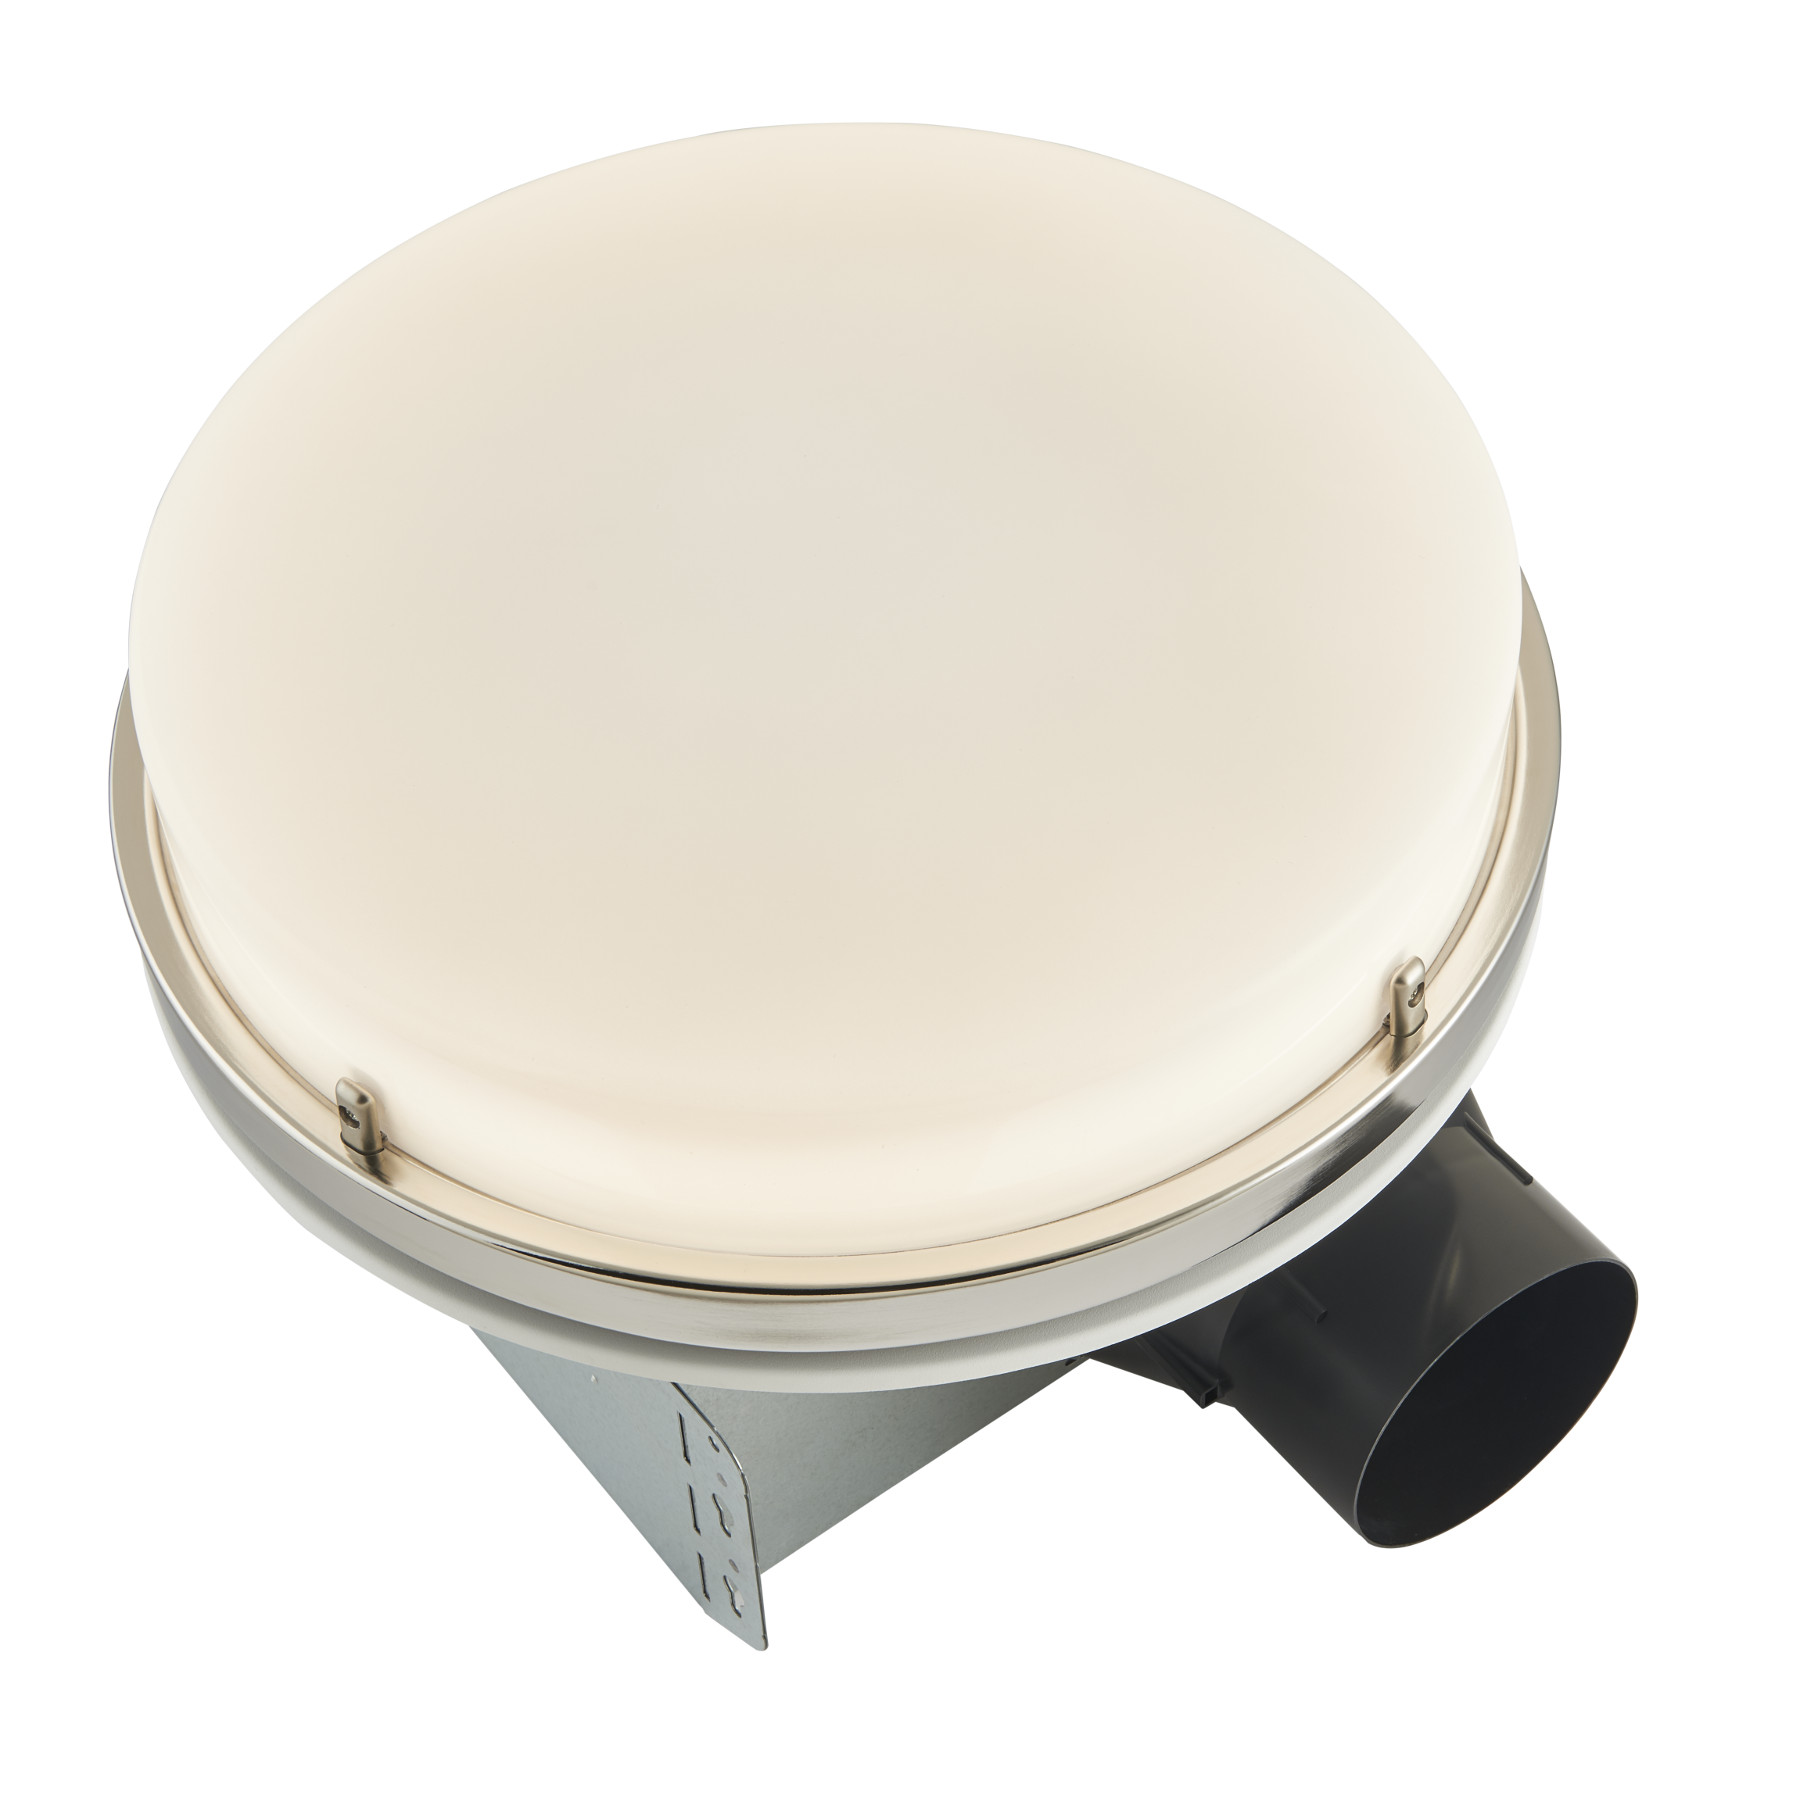 **DISCONTINUED** Broan® 110 CFM Decorative Bathroom Exhaust Fan with LED Light in Brushed Nickel, ENERGY STAR® 